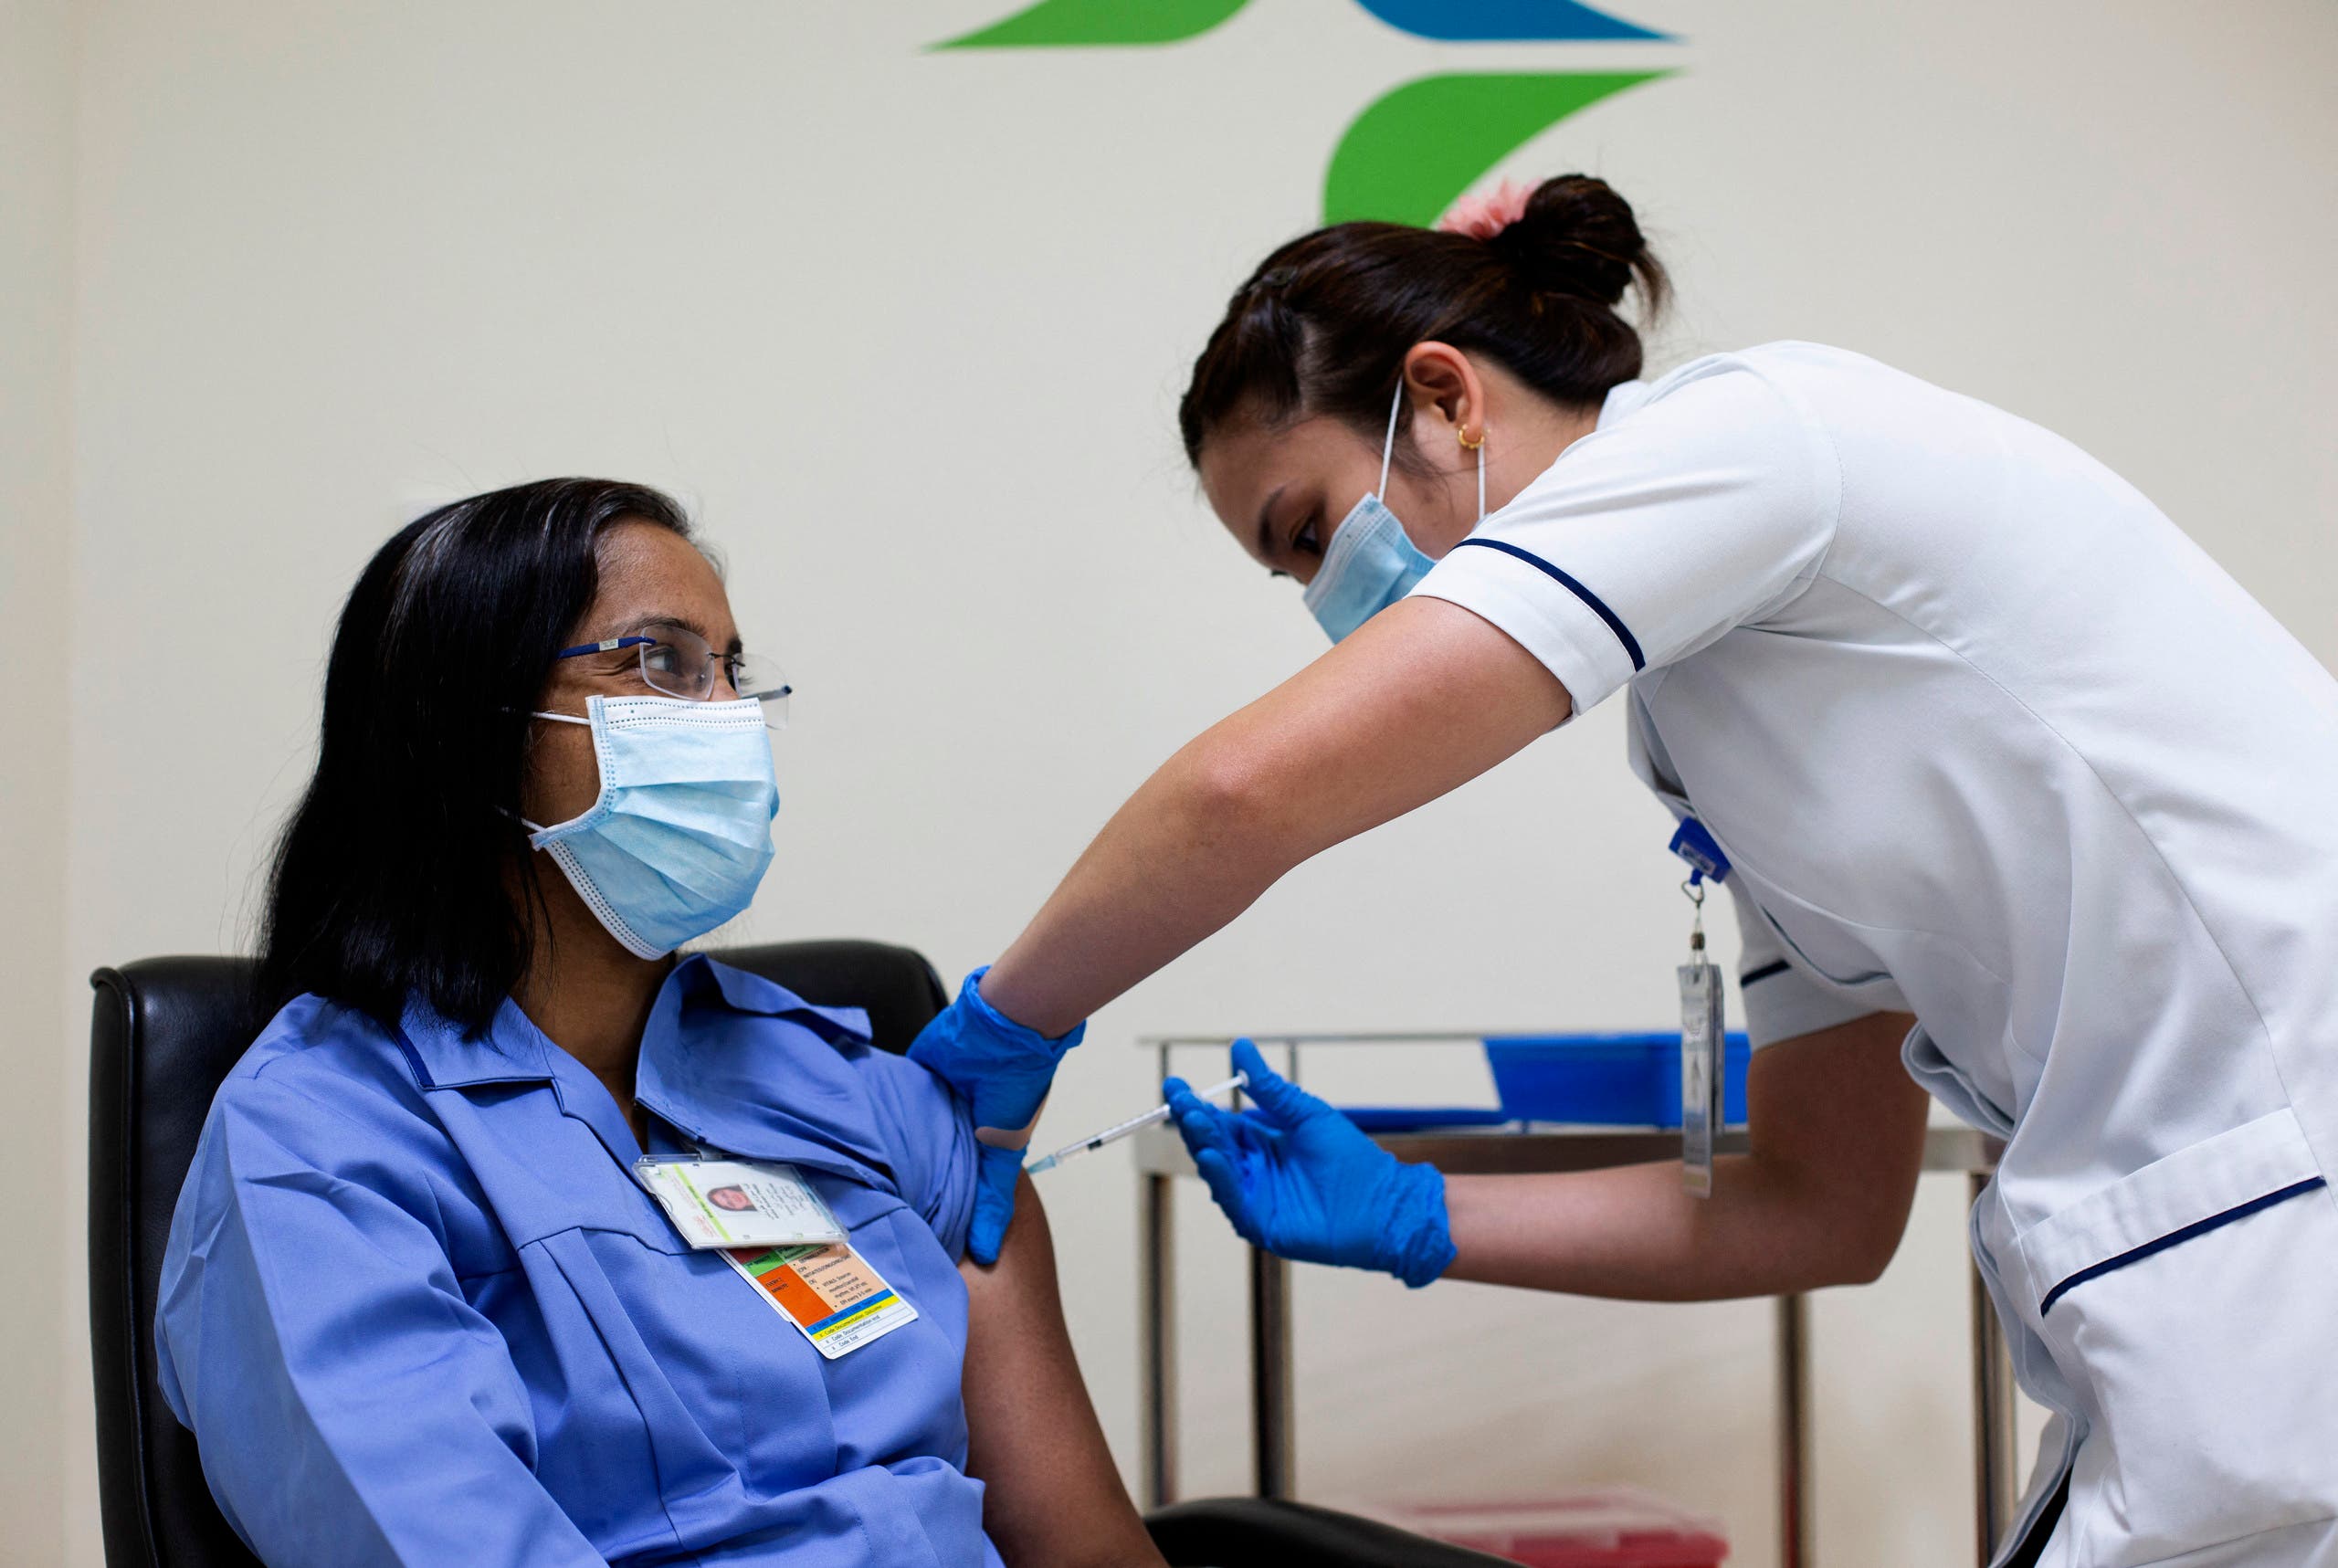 A handout picture taken by the Government of Dubai Media Office on December 23, 2020, shows a health worker administering a dose of the coronavirus vaccine to a nurse at a medical center in the Dubai Emirate. (File photo: AFP)